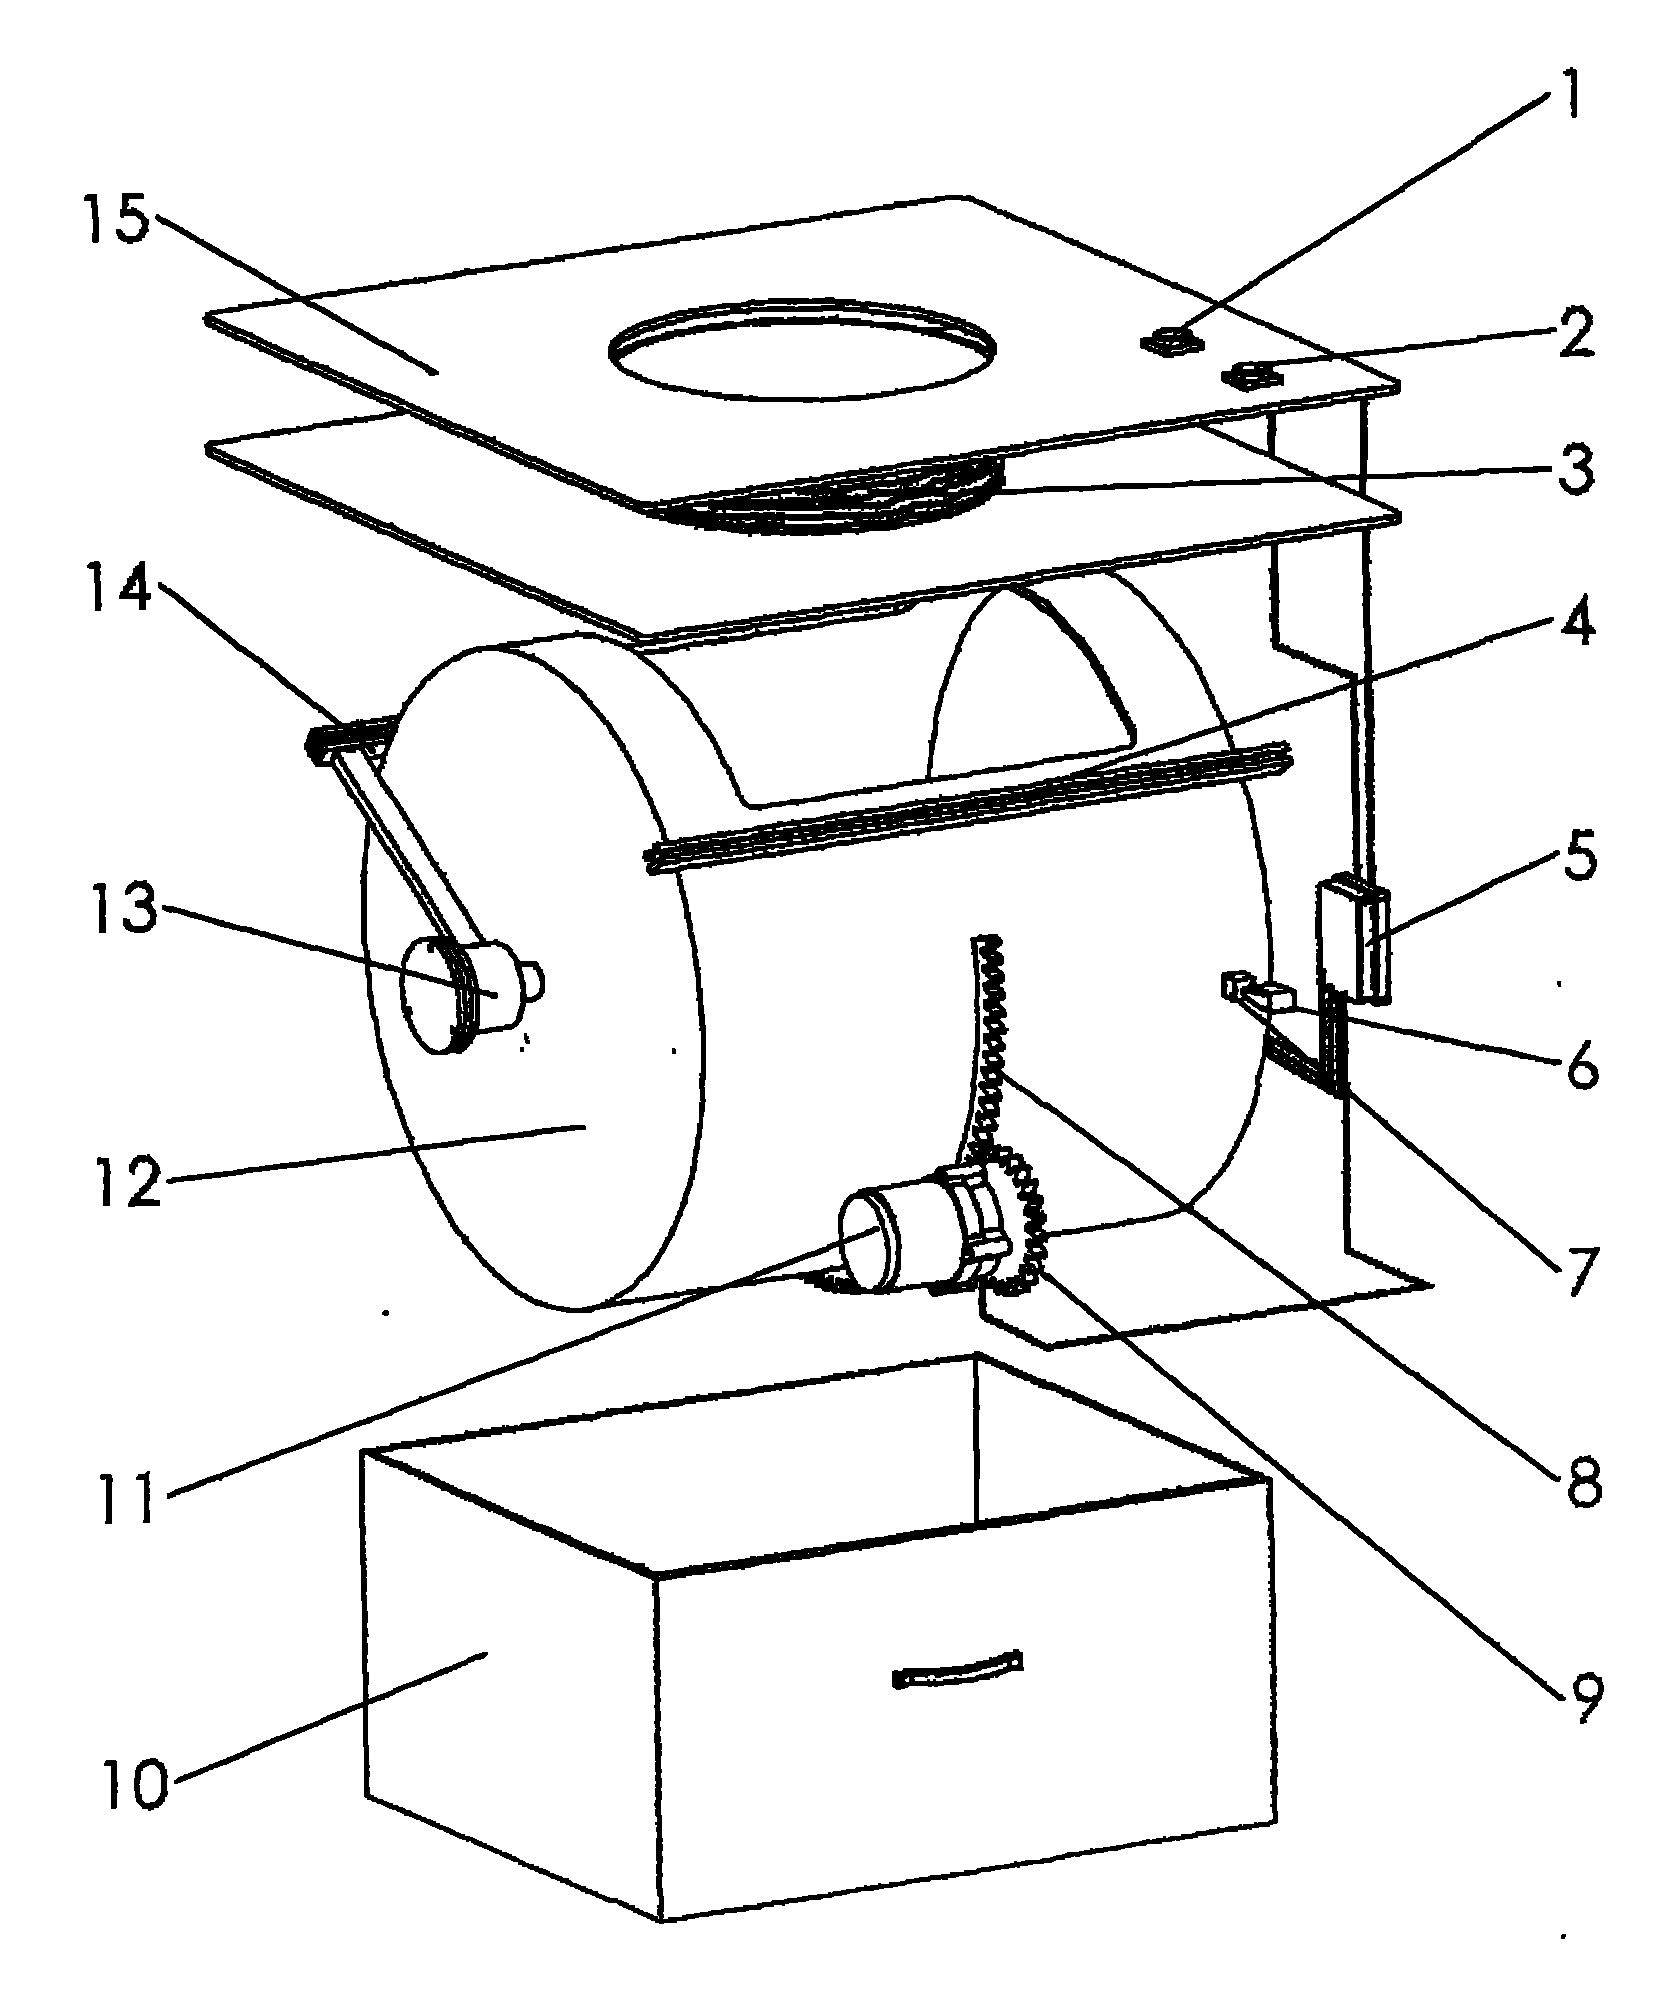 Full-automatic safety dustbin